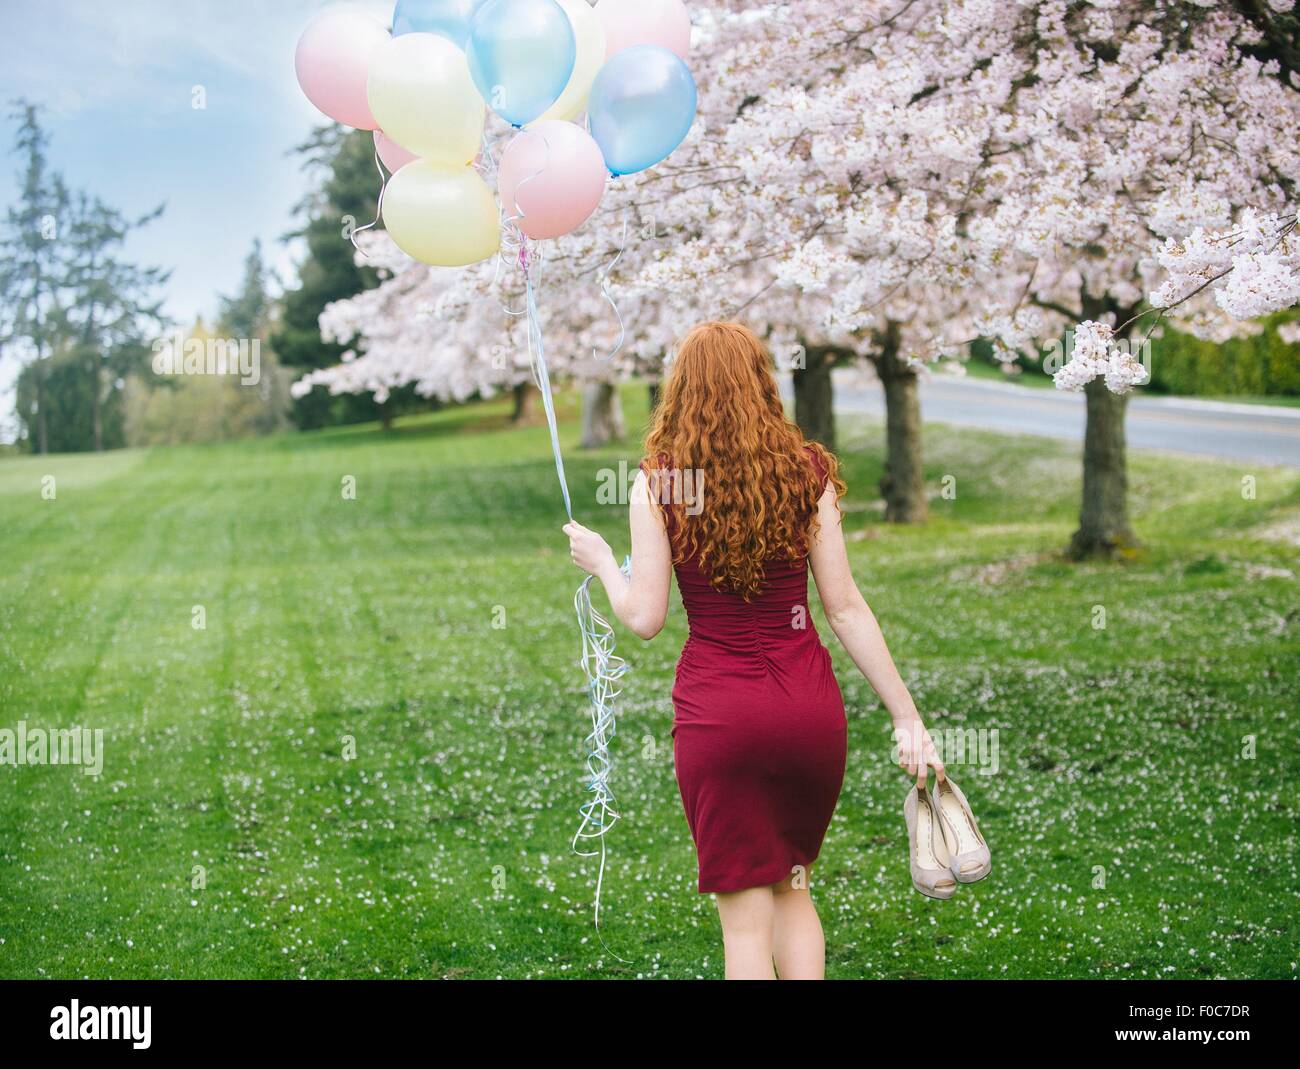 Rear view of young woman with long wavy red hair and bunch of balloons strolling in spring park Stock Photo